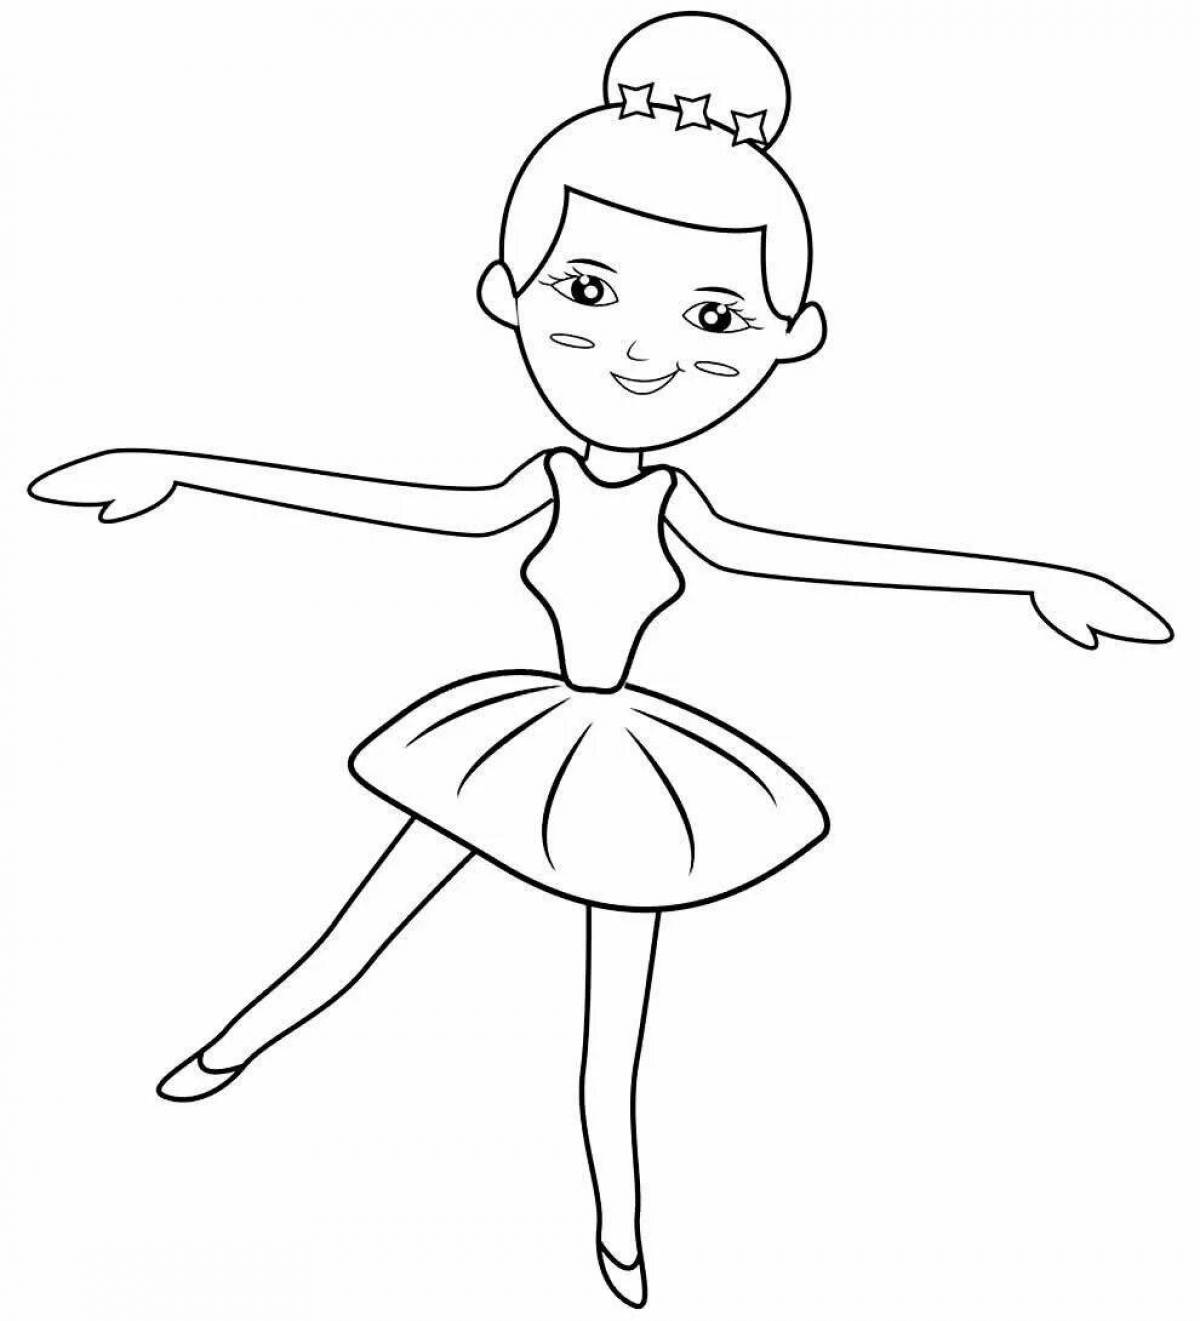 Coloring page graceful ballerina